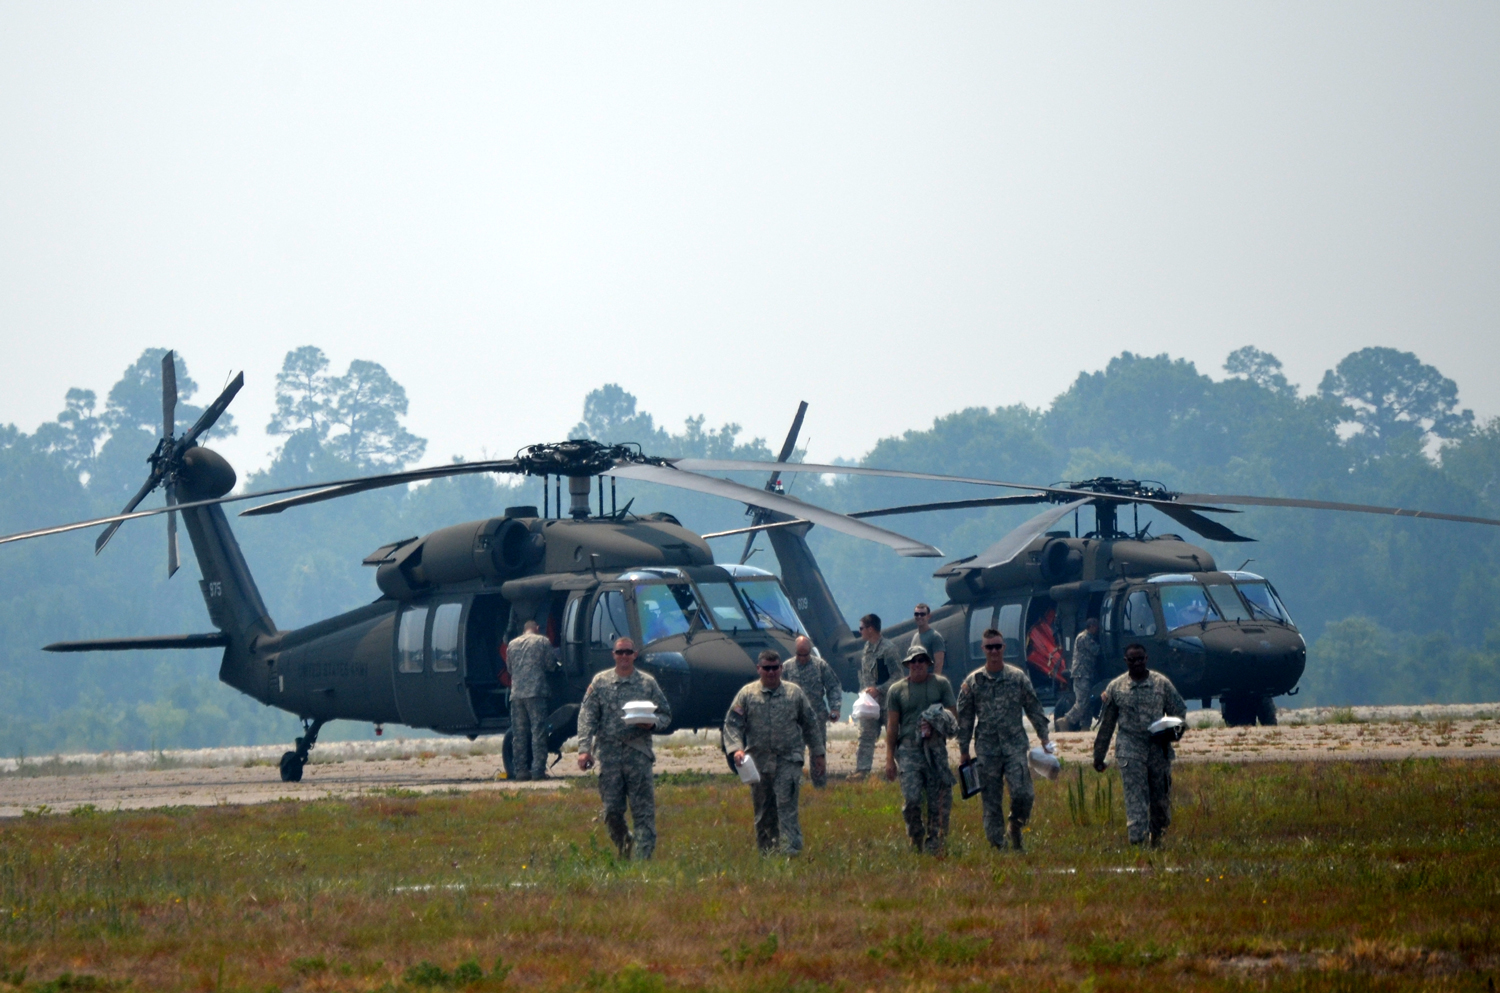 The right stuff: the Florida Army National Guard's Black Hawk crews right after arriving in Flagler County on Wednesday. (© FlaglerLive)